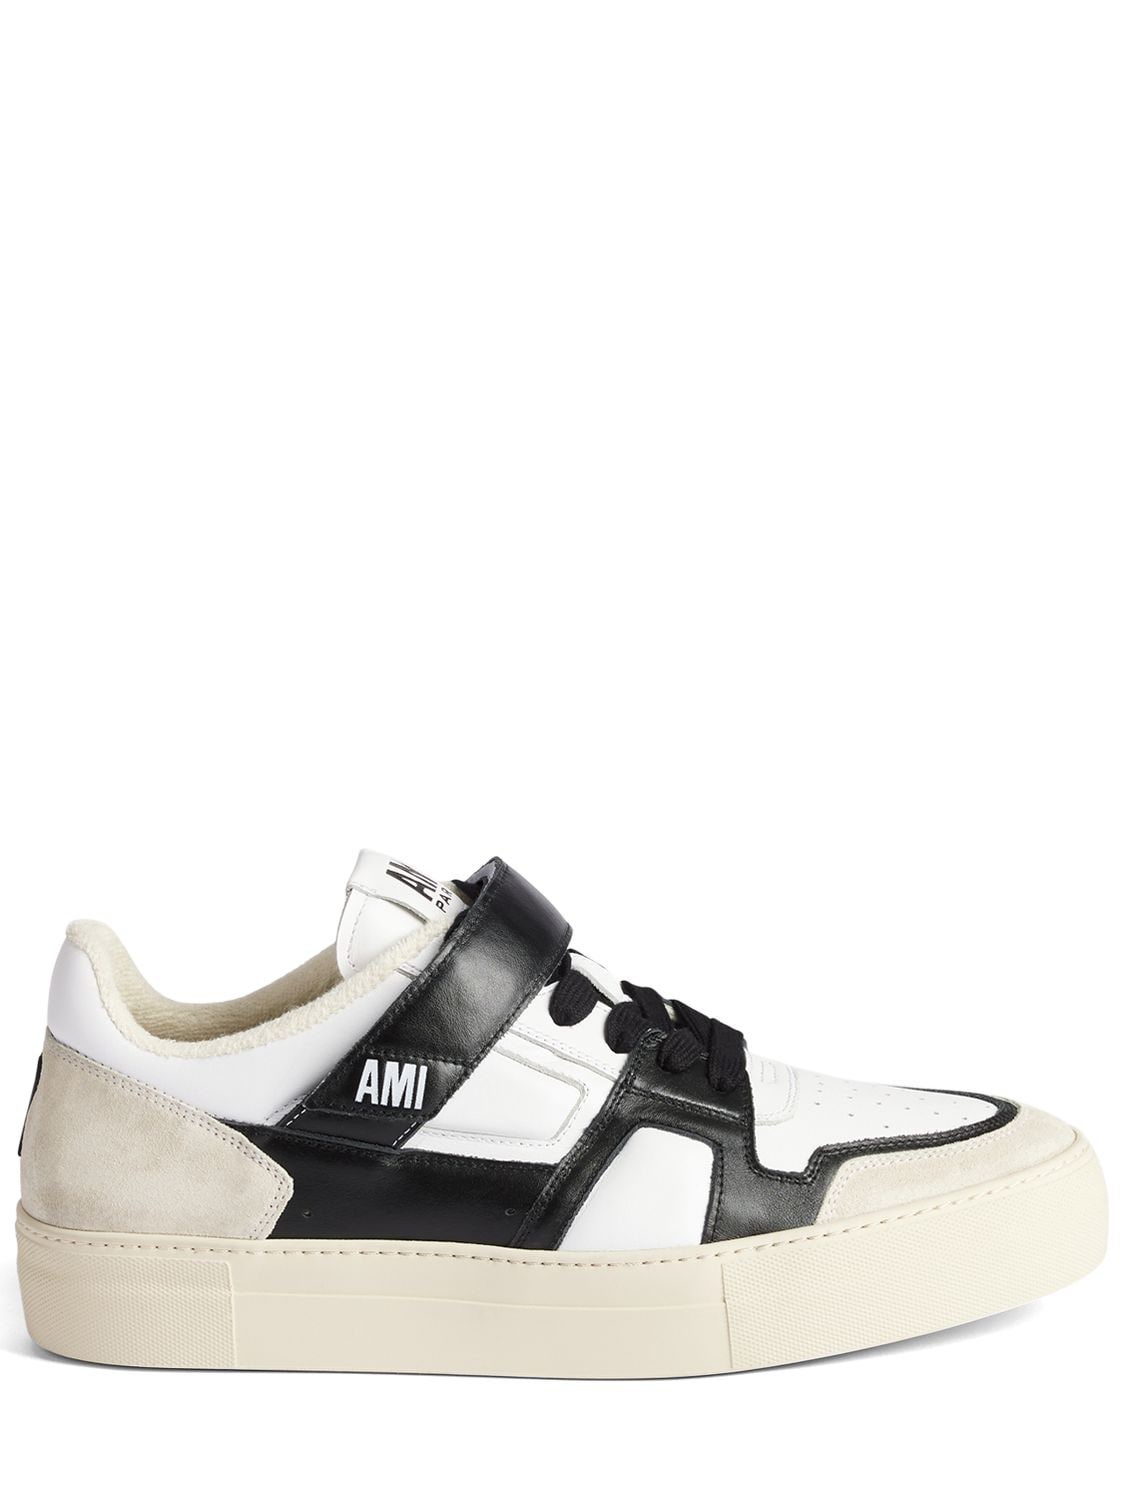 AMI PARIS Leather & Suede Sneakers